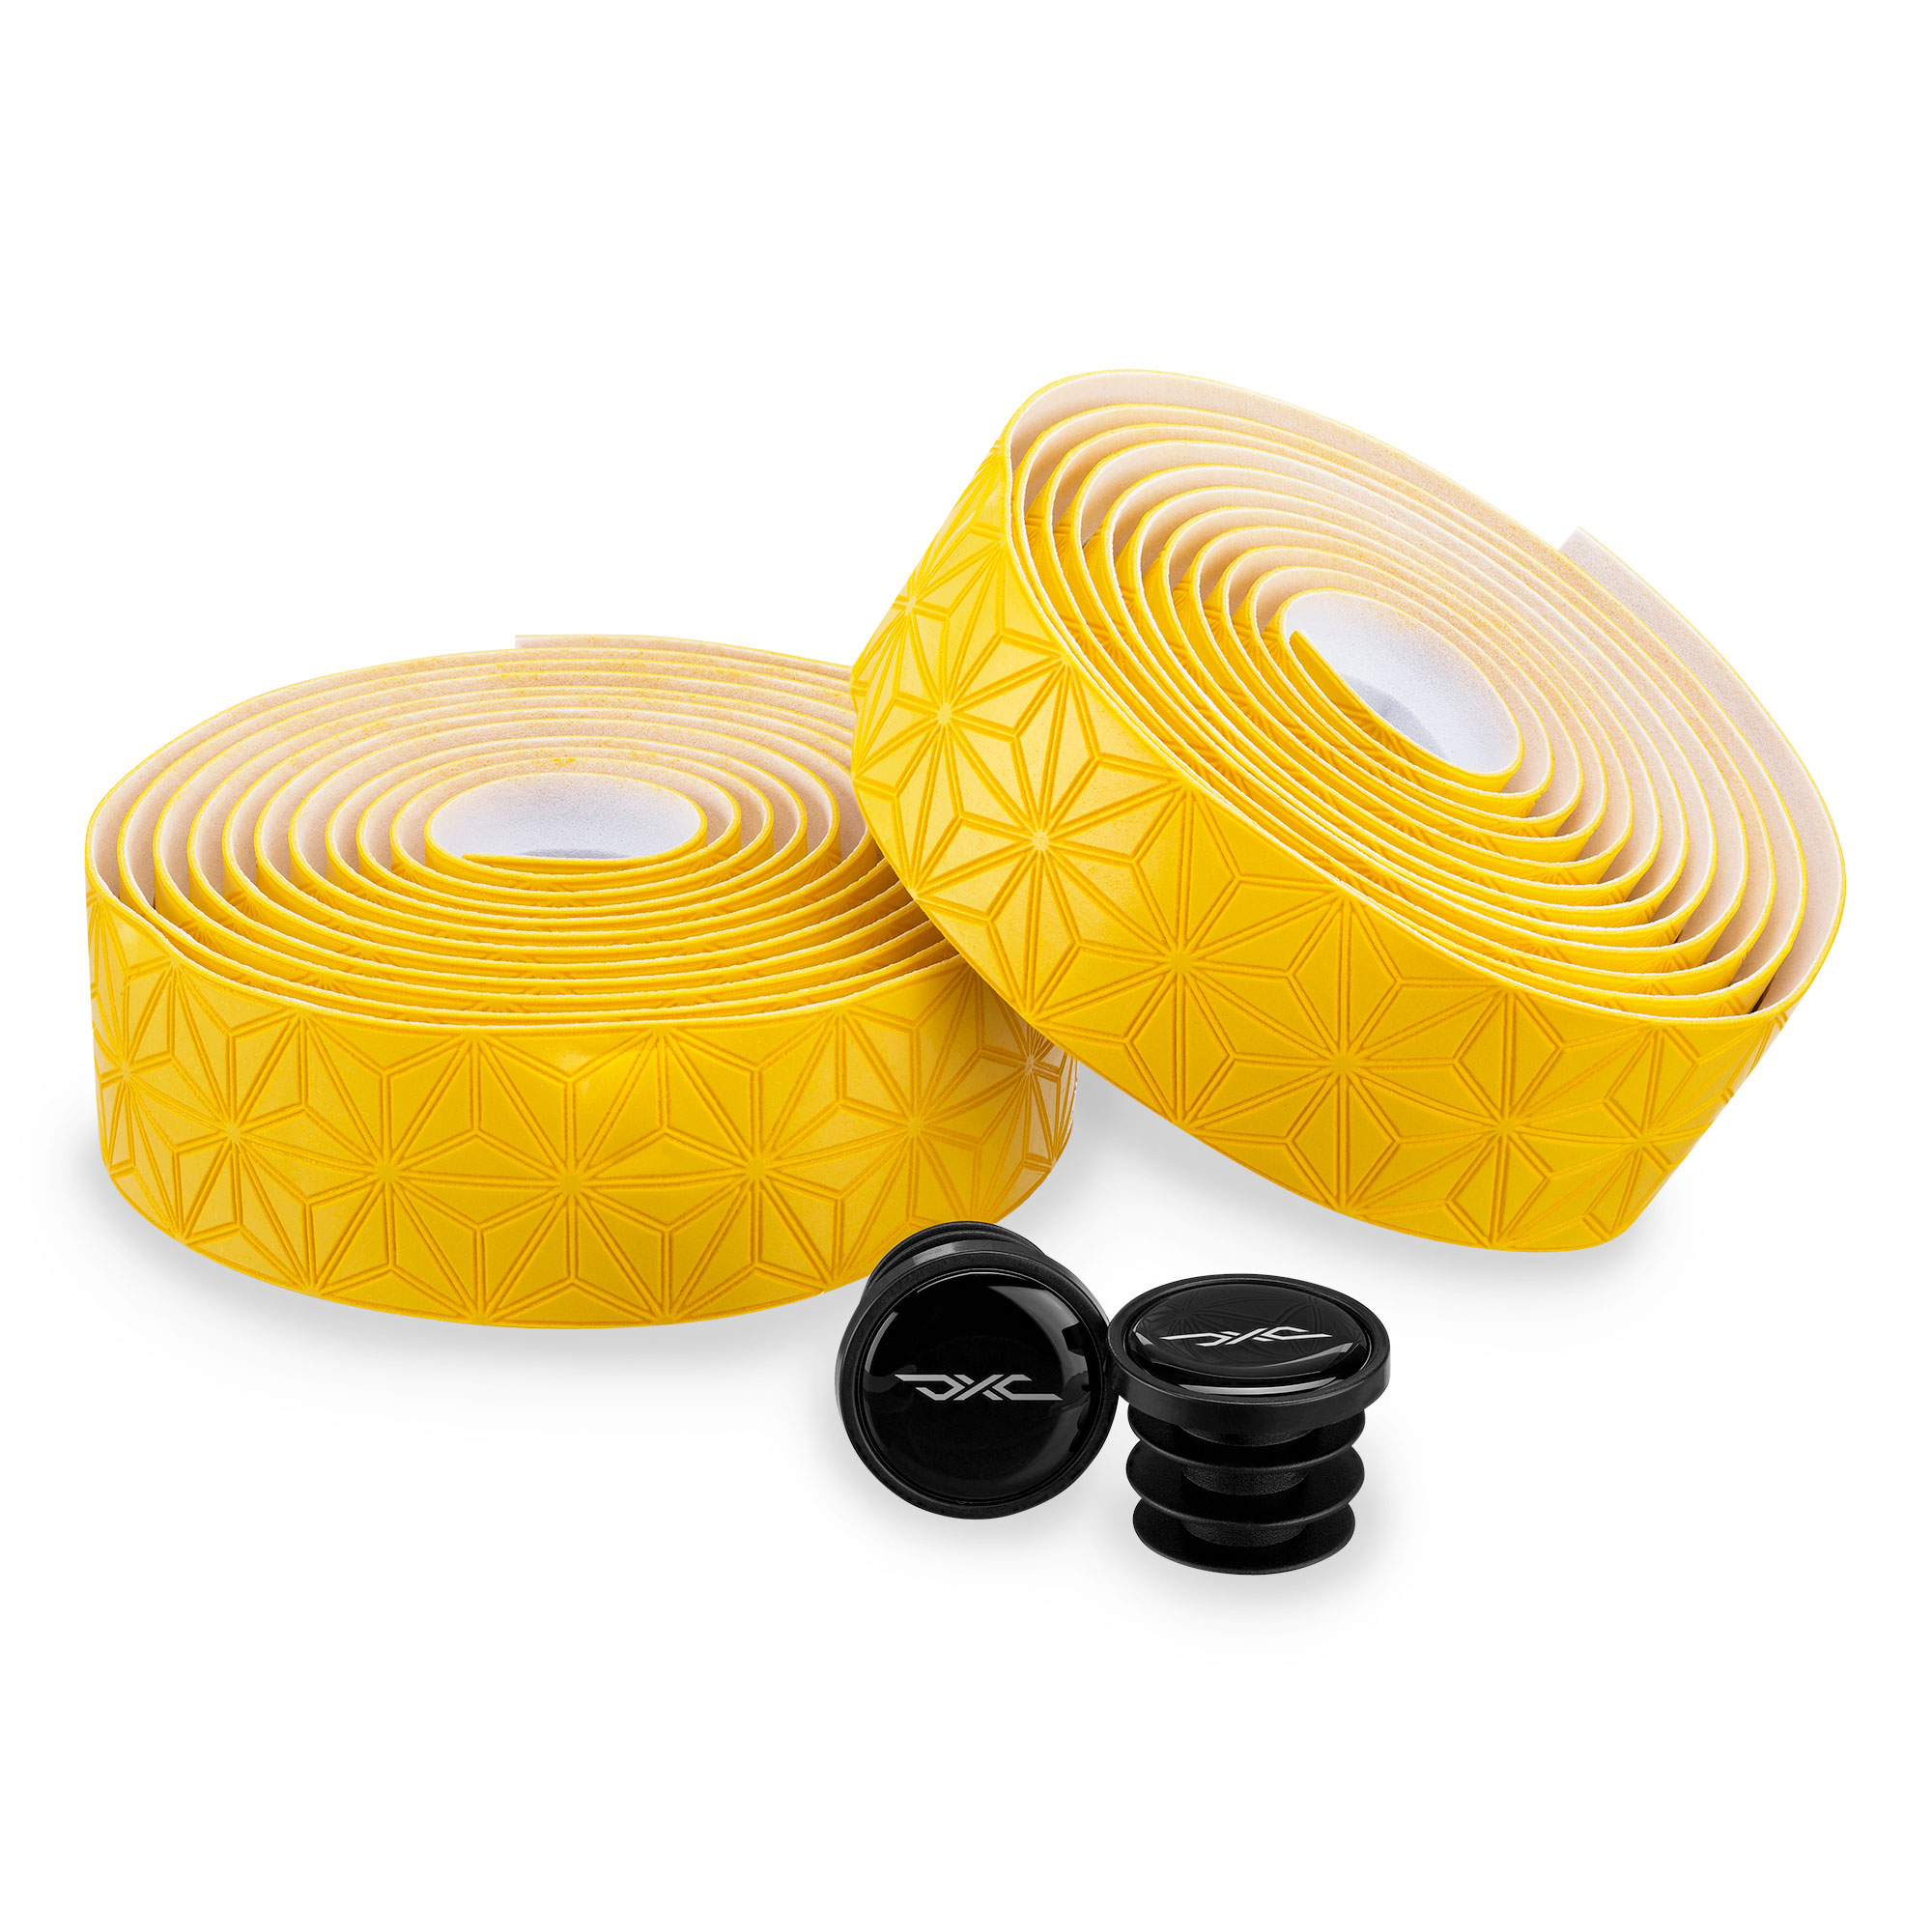 Picture of DXC BT Bar Tape - Embossed - Yellow Stars